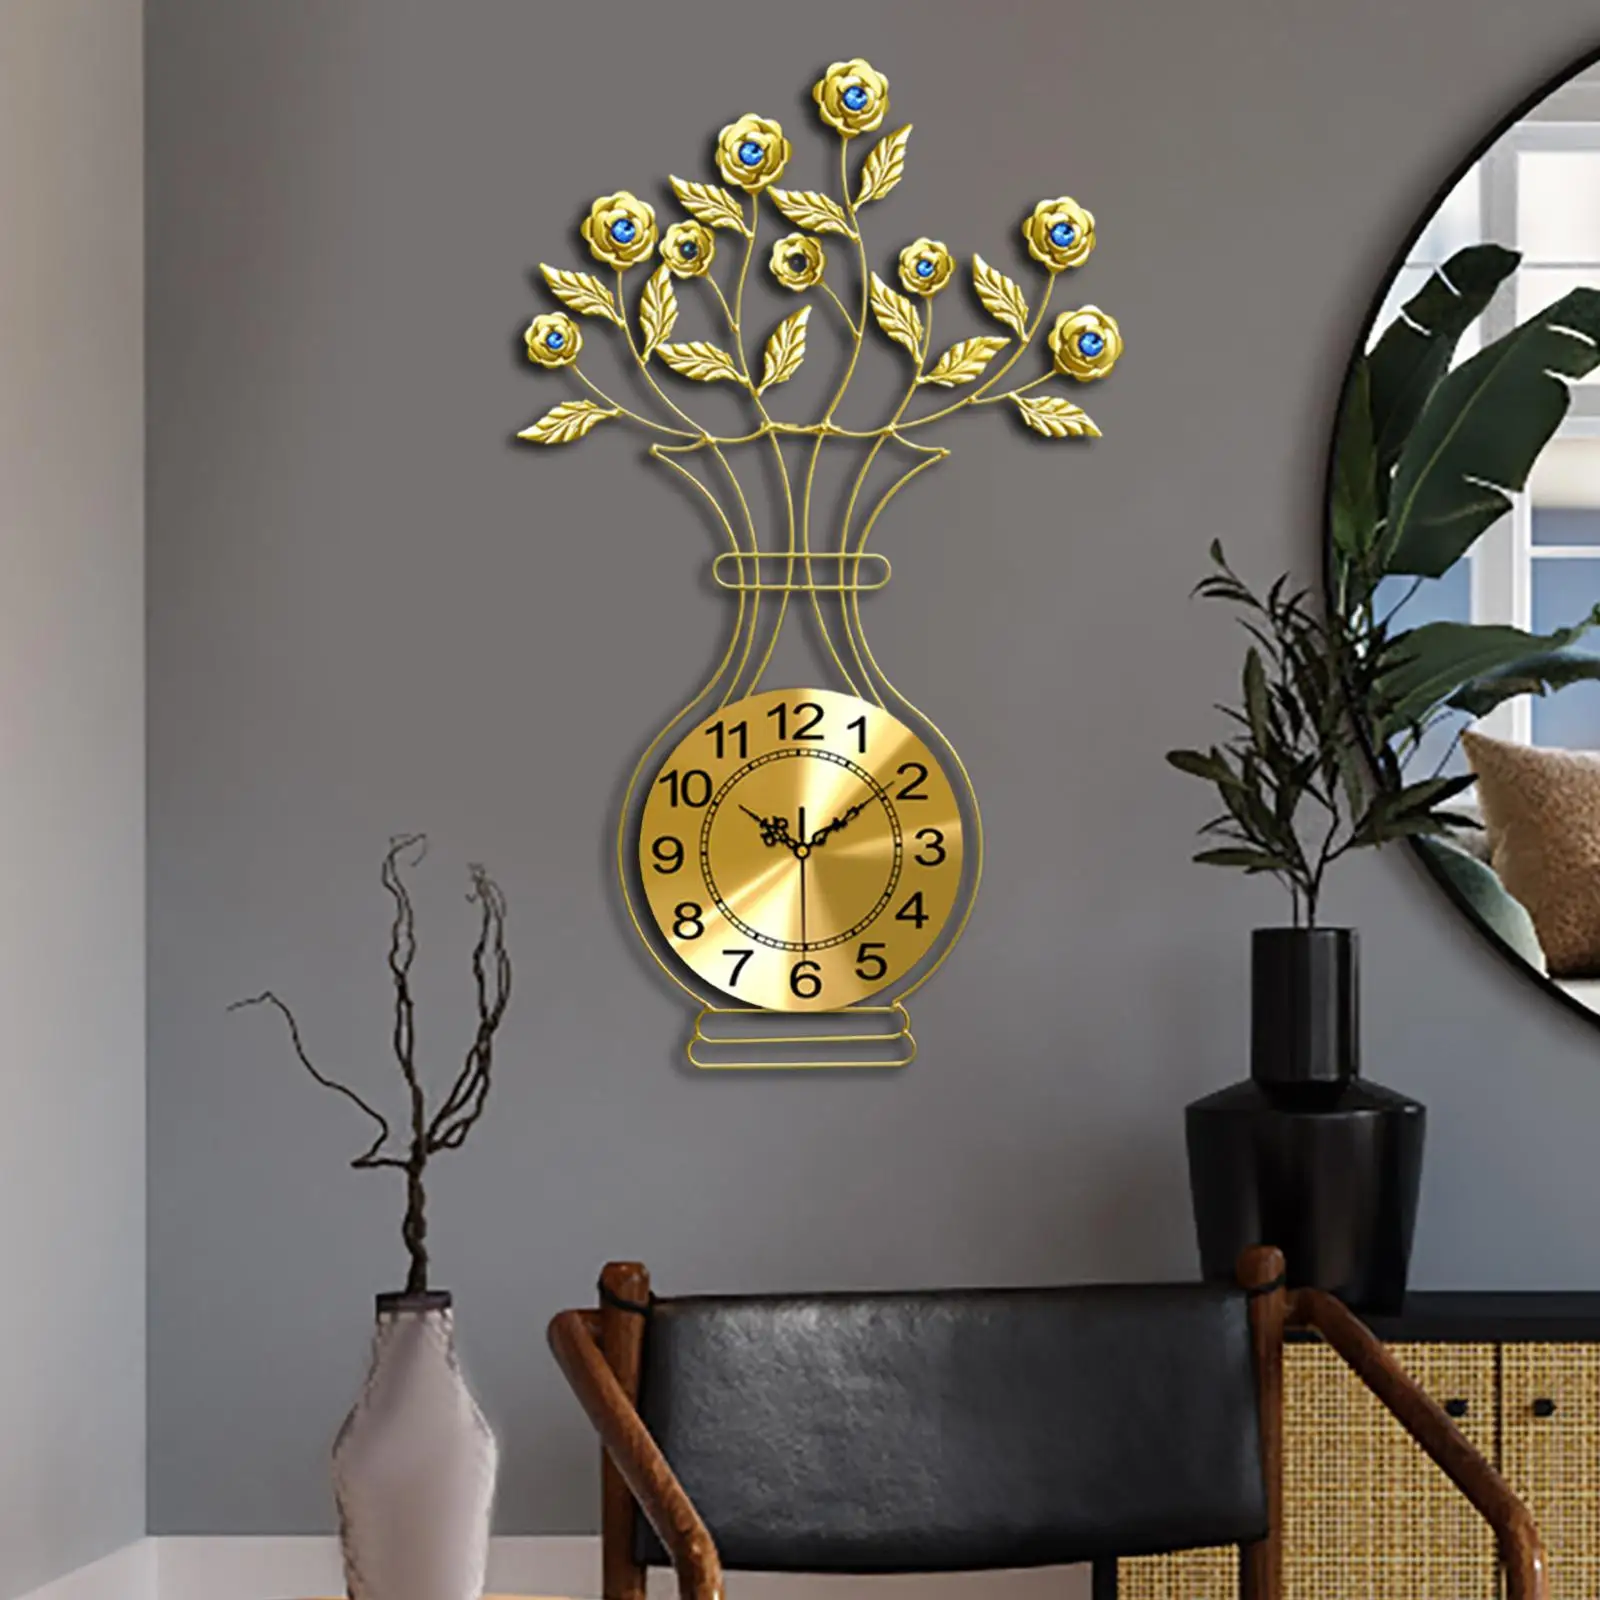 wall Clock Non Ticking Decor Porch Decoration Leaves Hanging Decorative for Bathroom Kitchen Wall Background Art Decor